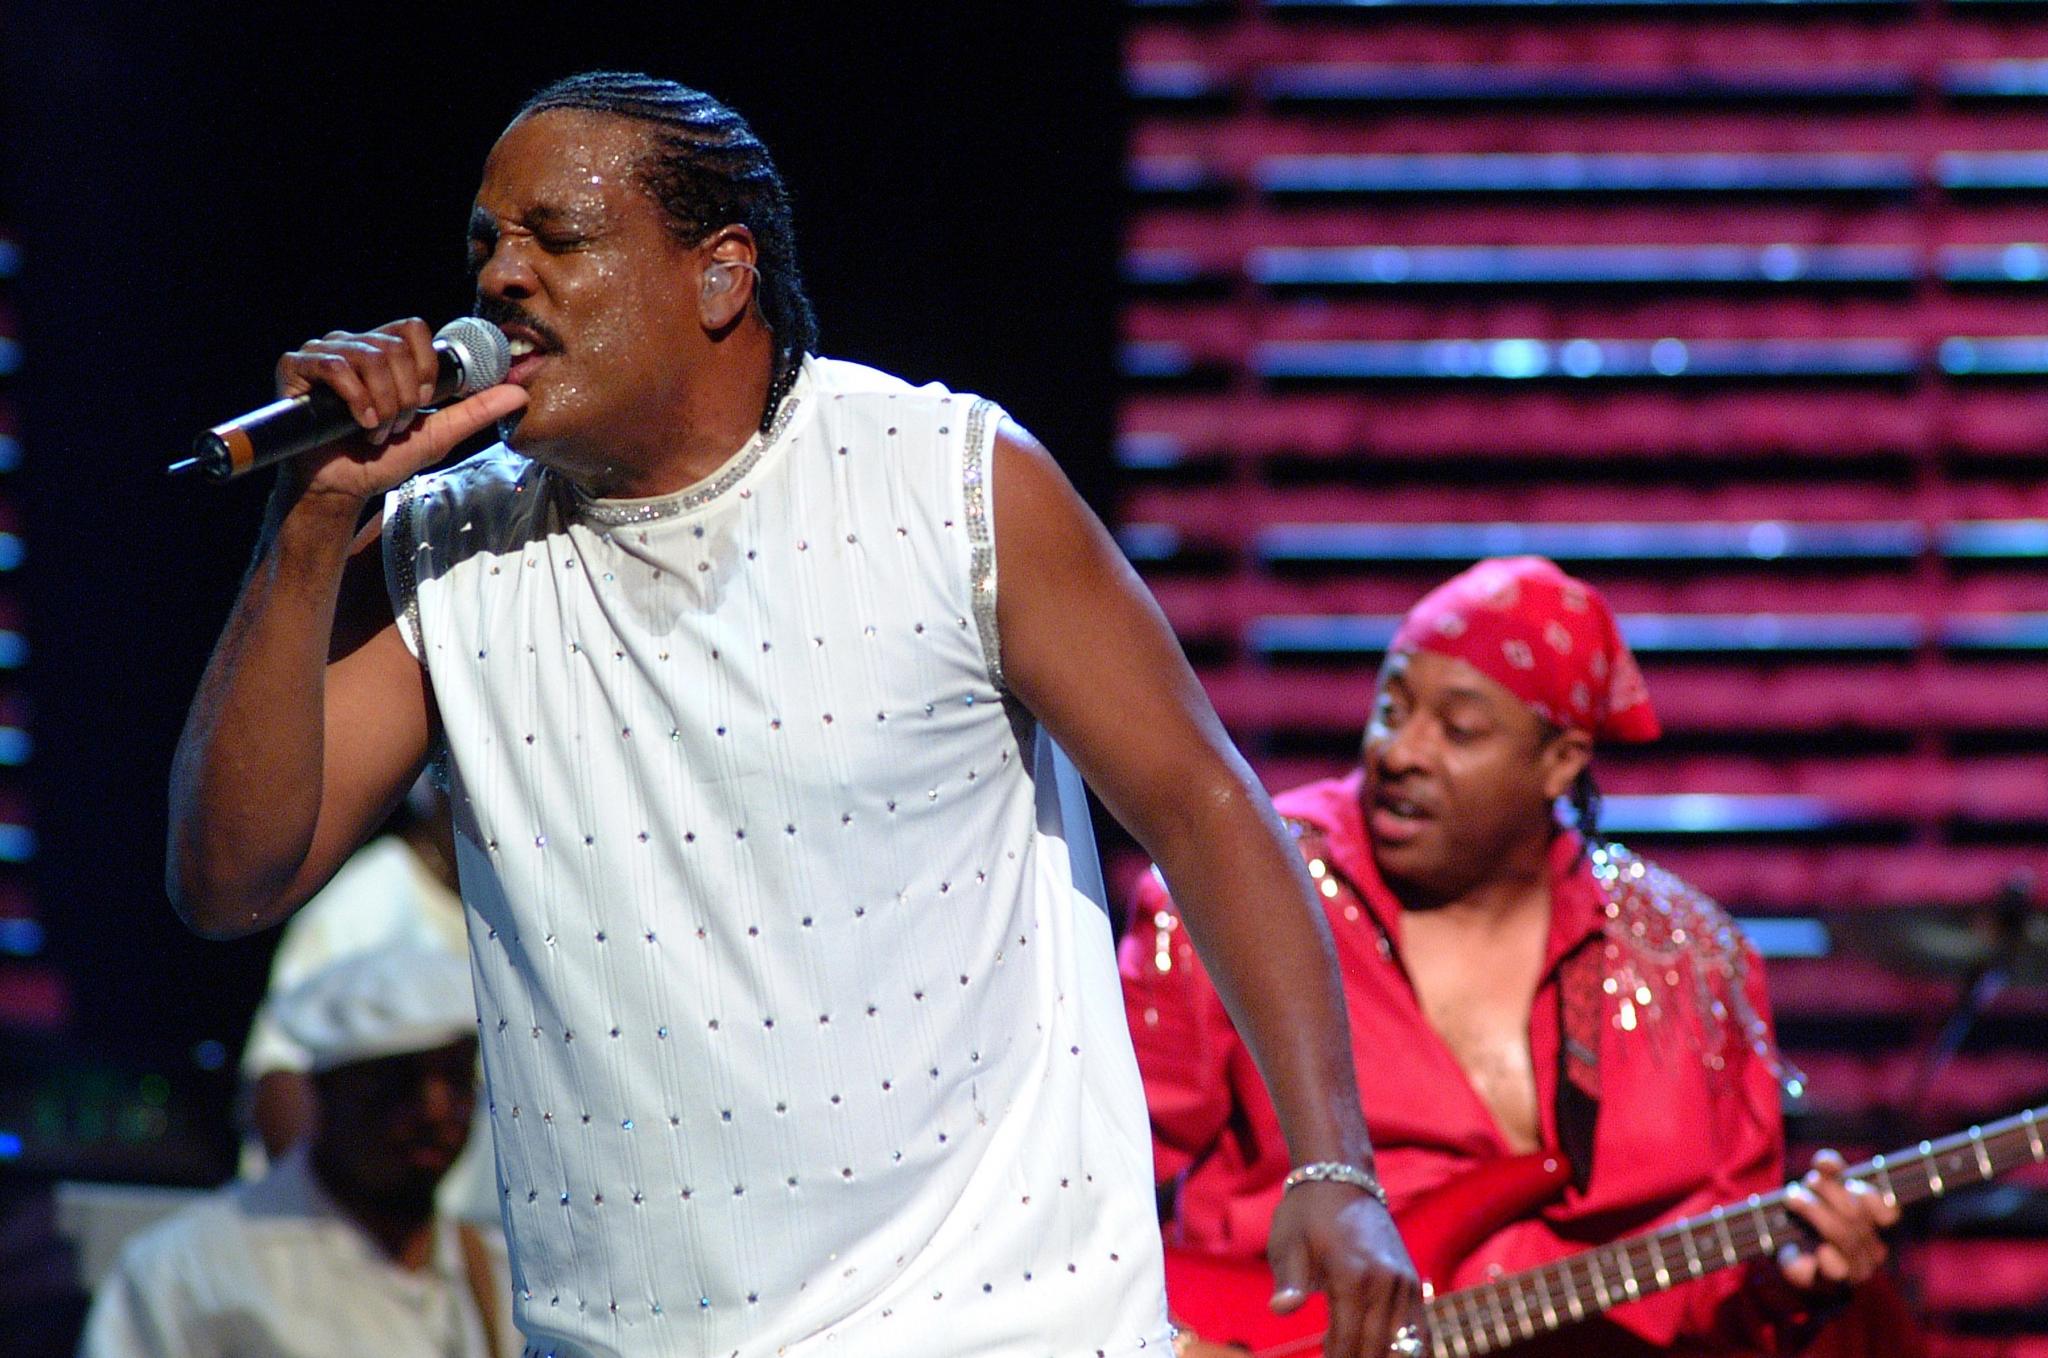 #20Years 20Stages: The Best Bands & Groups in ESSENCE Fest History